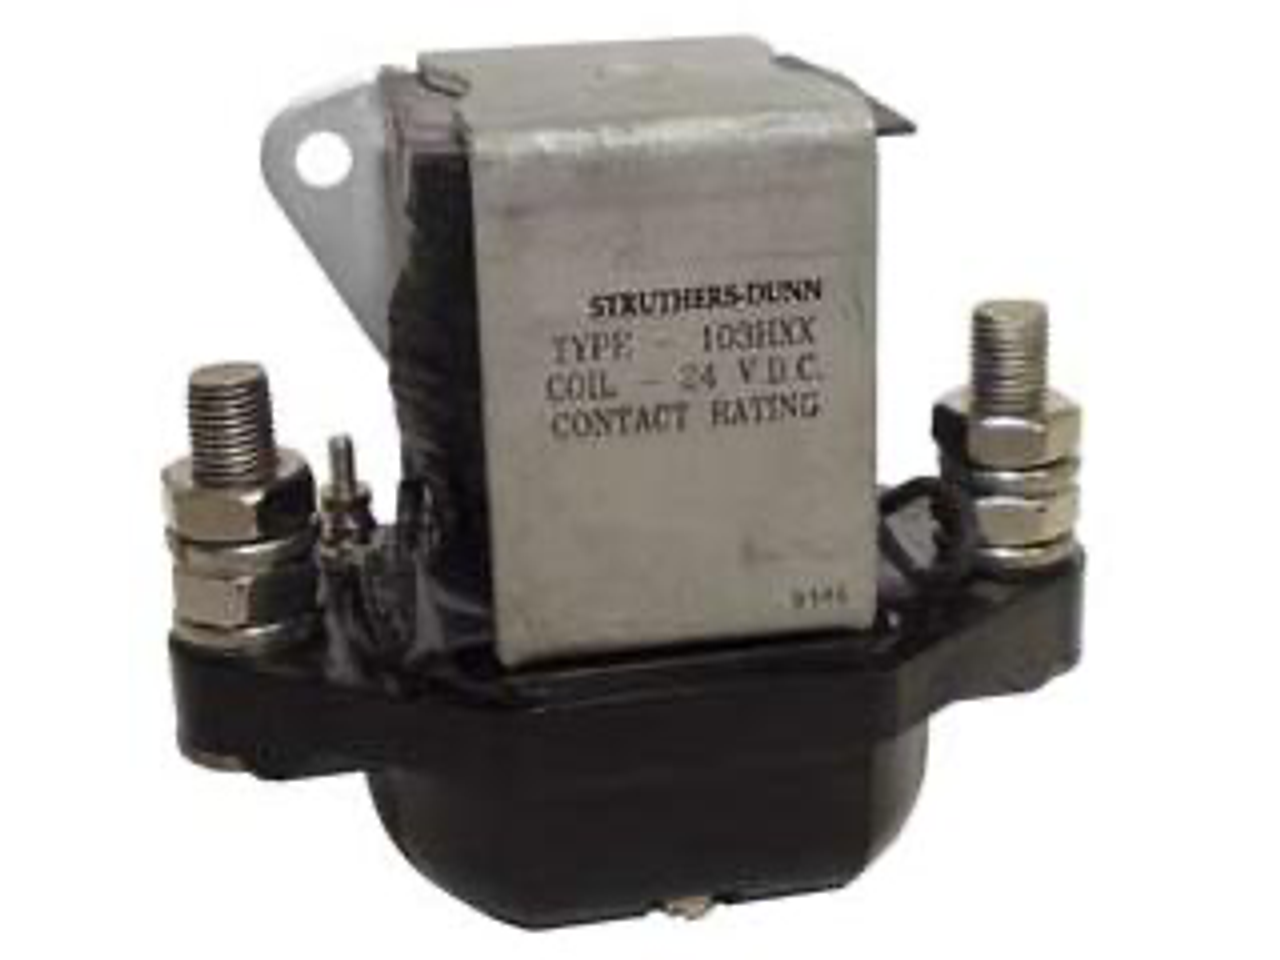 Struthers-Dunn 103HXX-28VDC Power Contactors